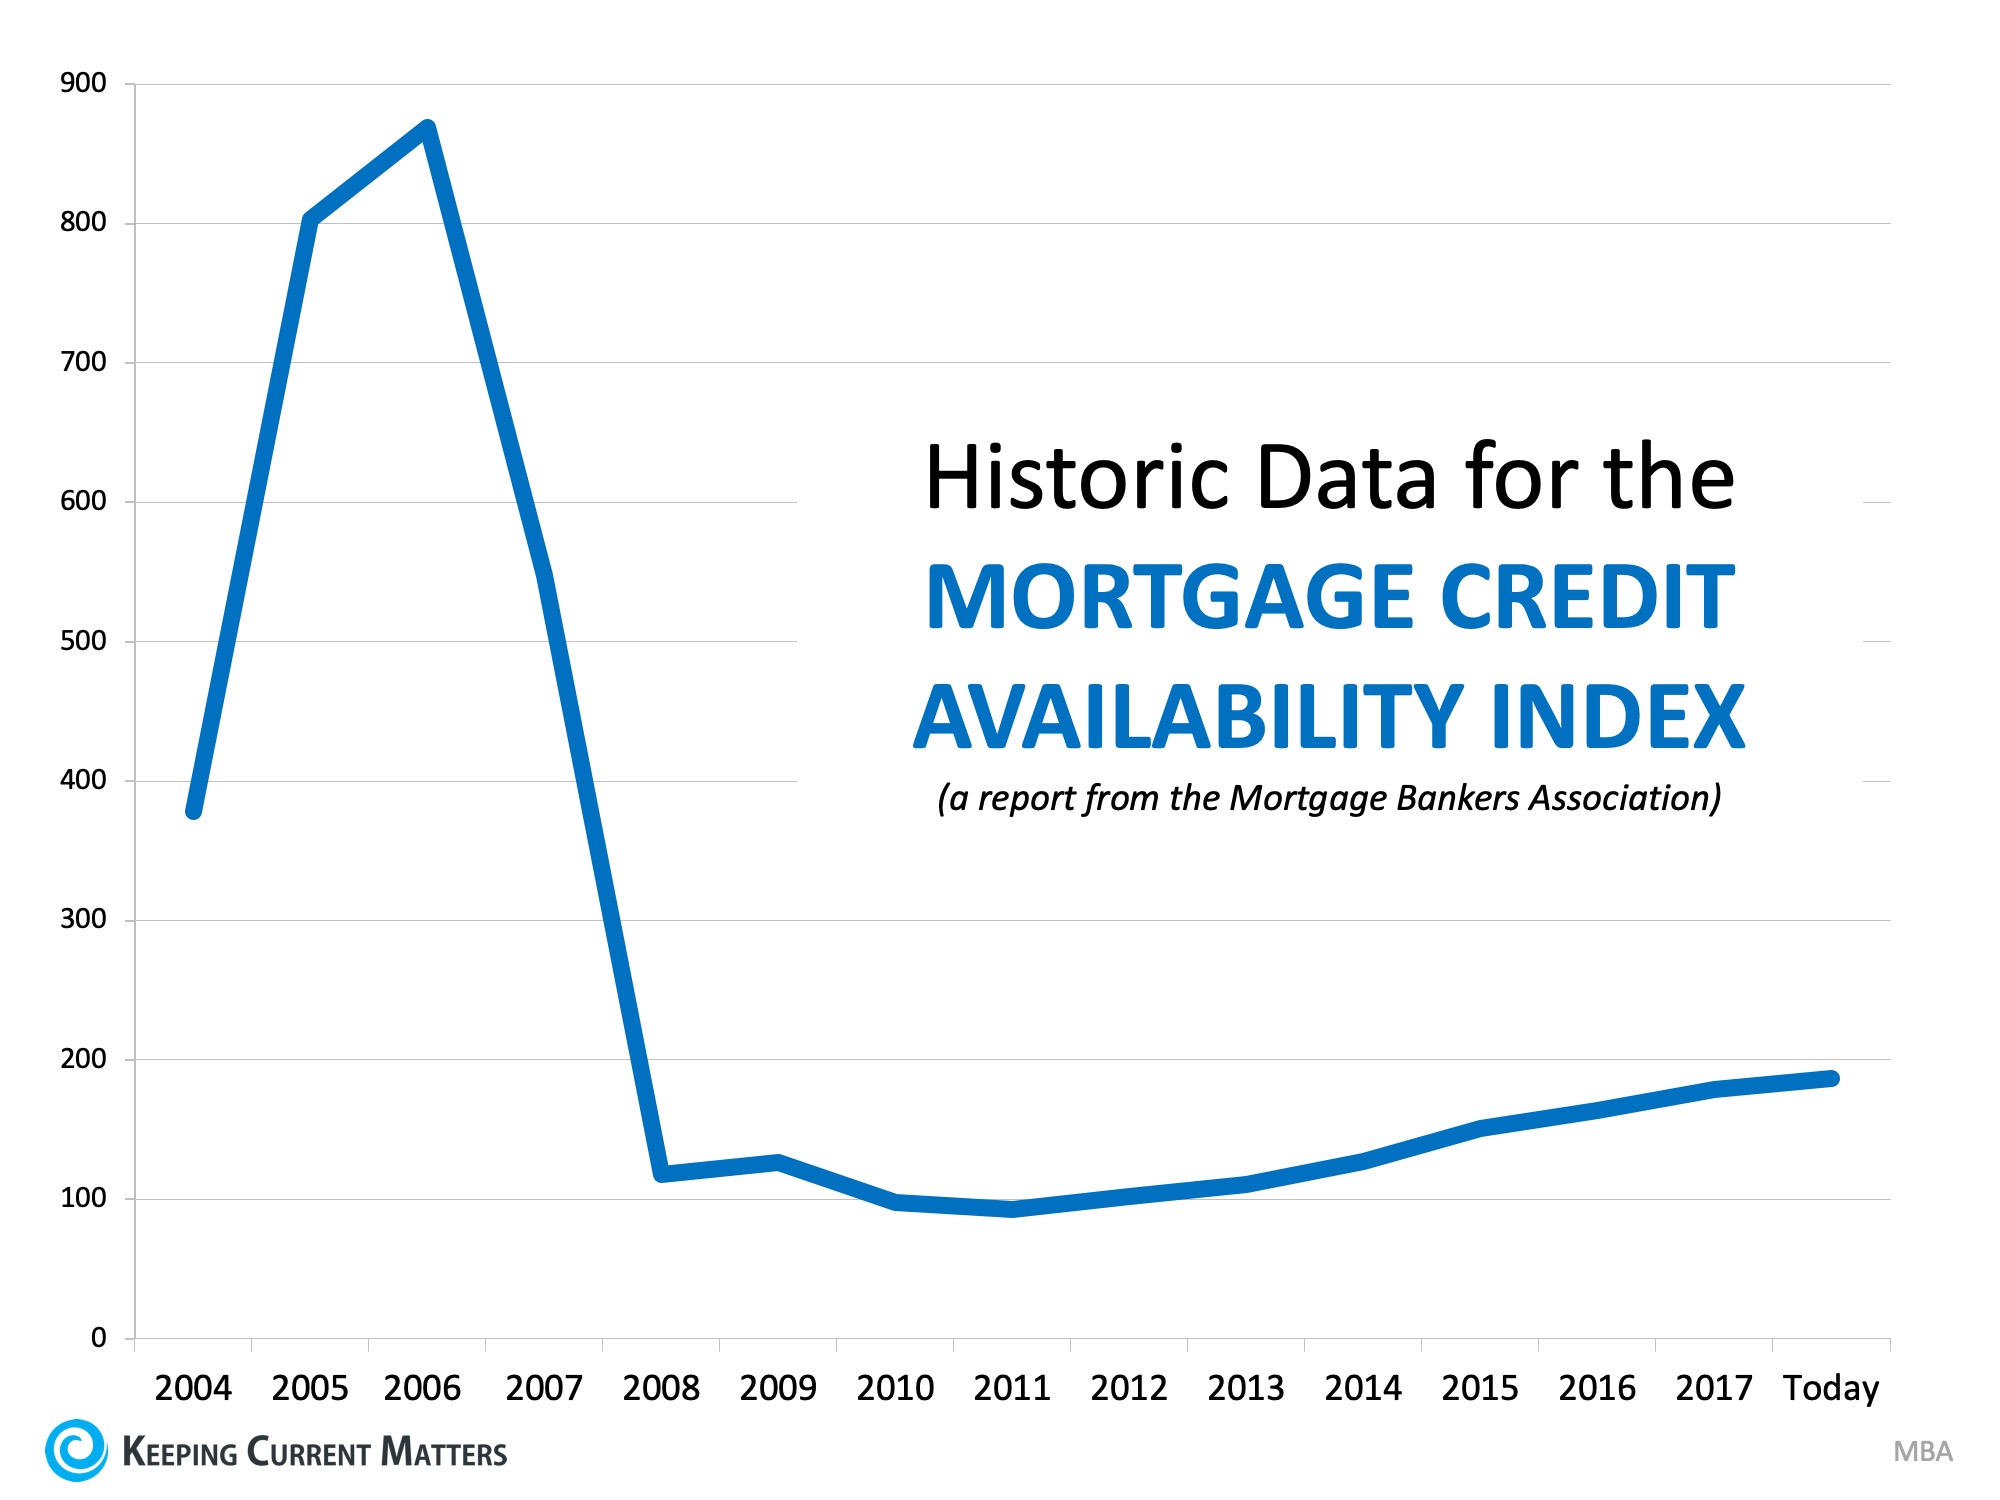 Historic Data for Mortgage Credit Availability Index